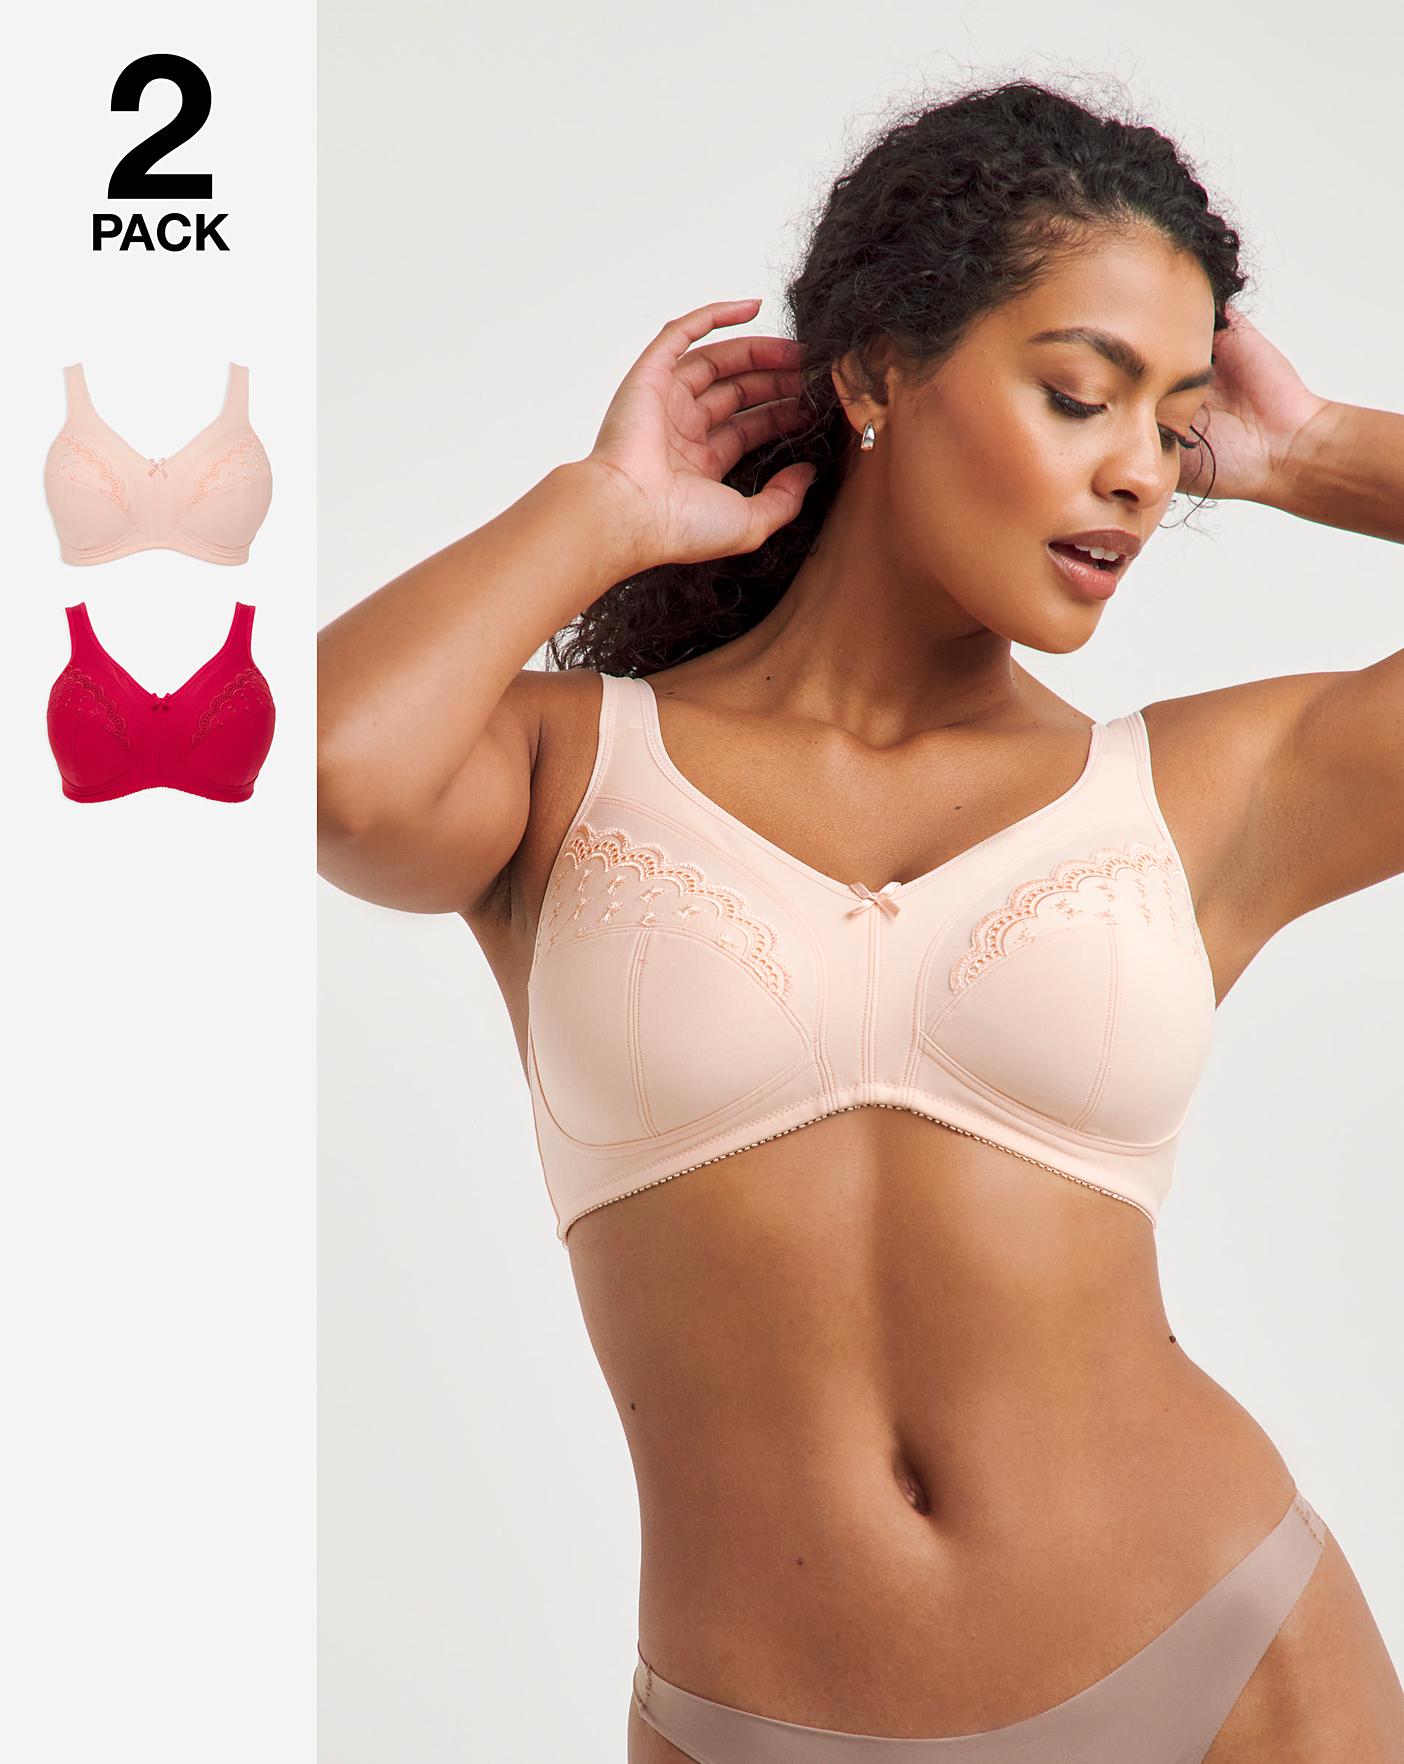 Large Size Non-Wired Bra 2-Pack